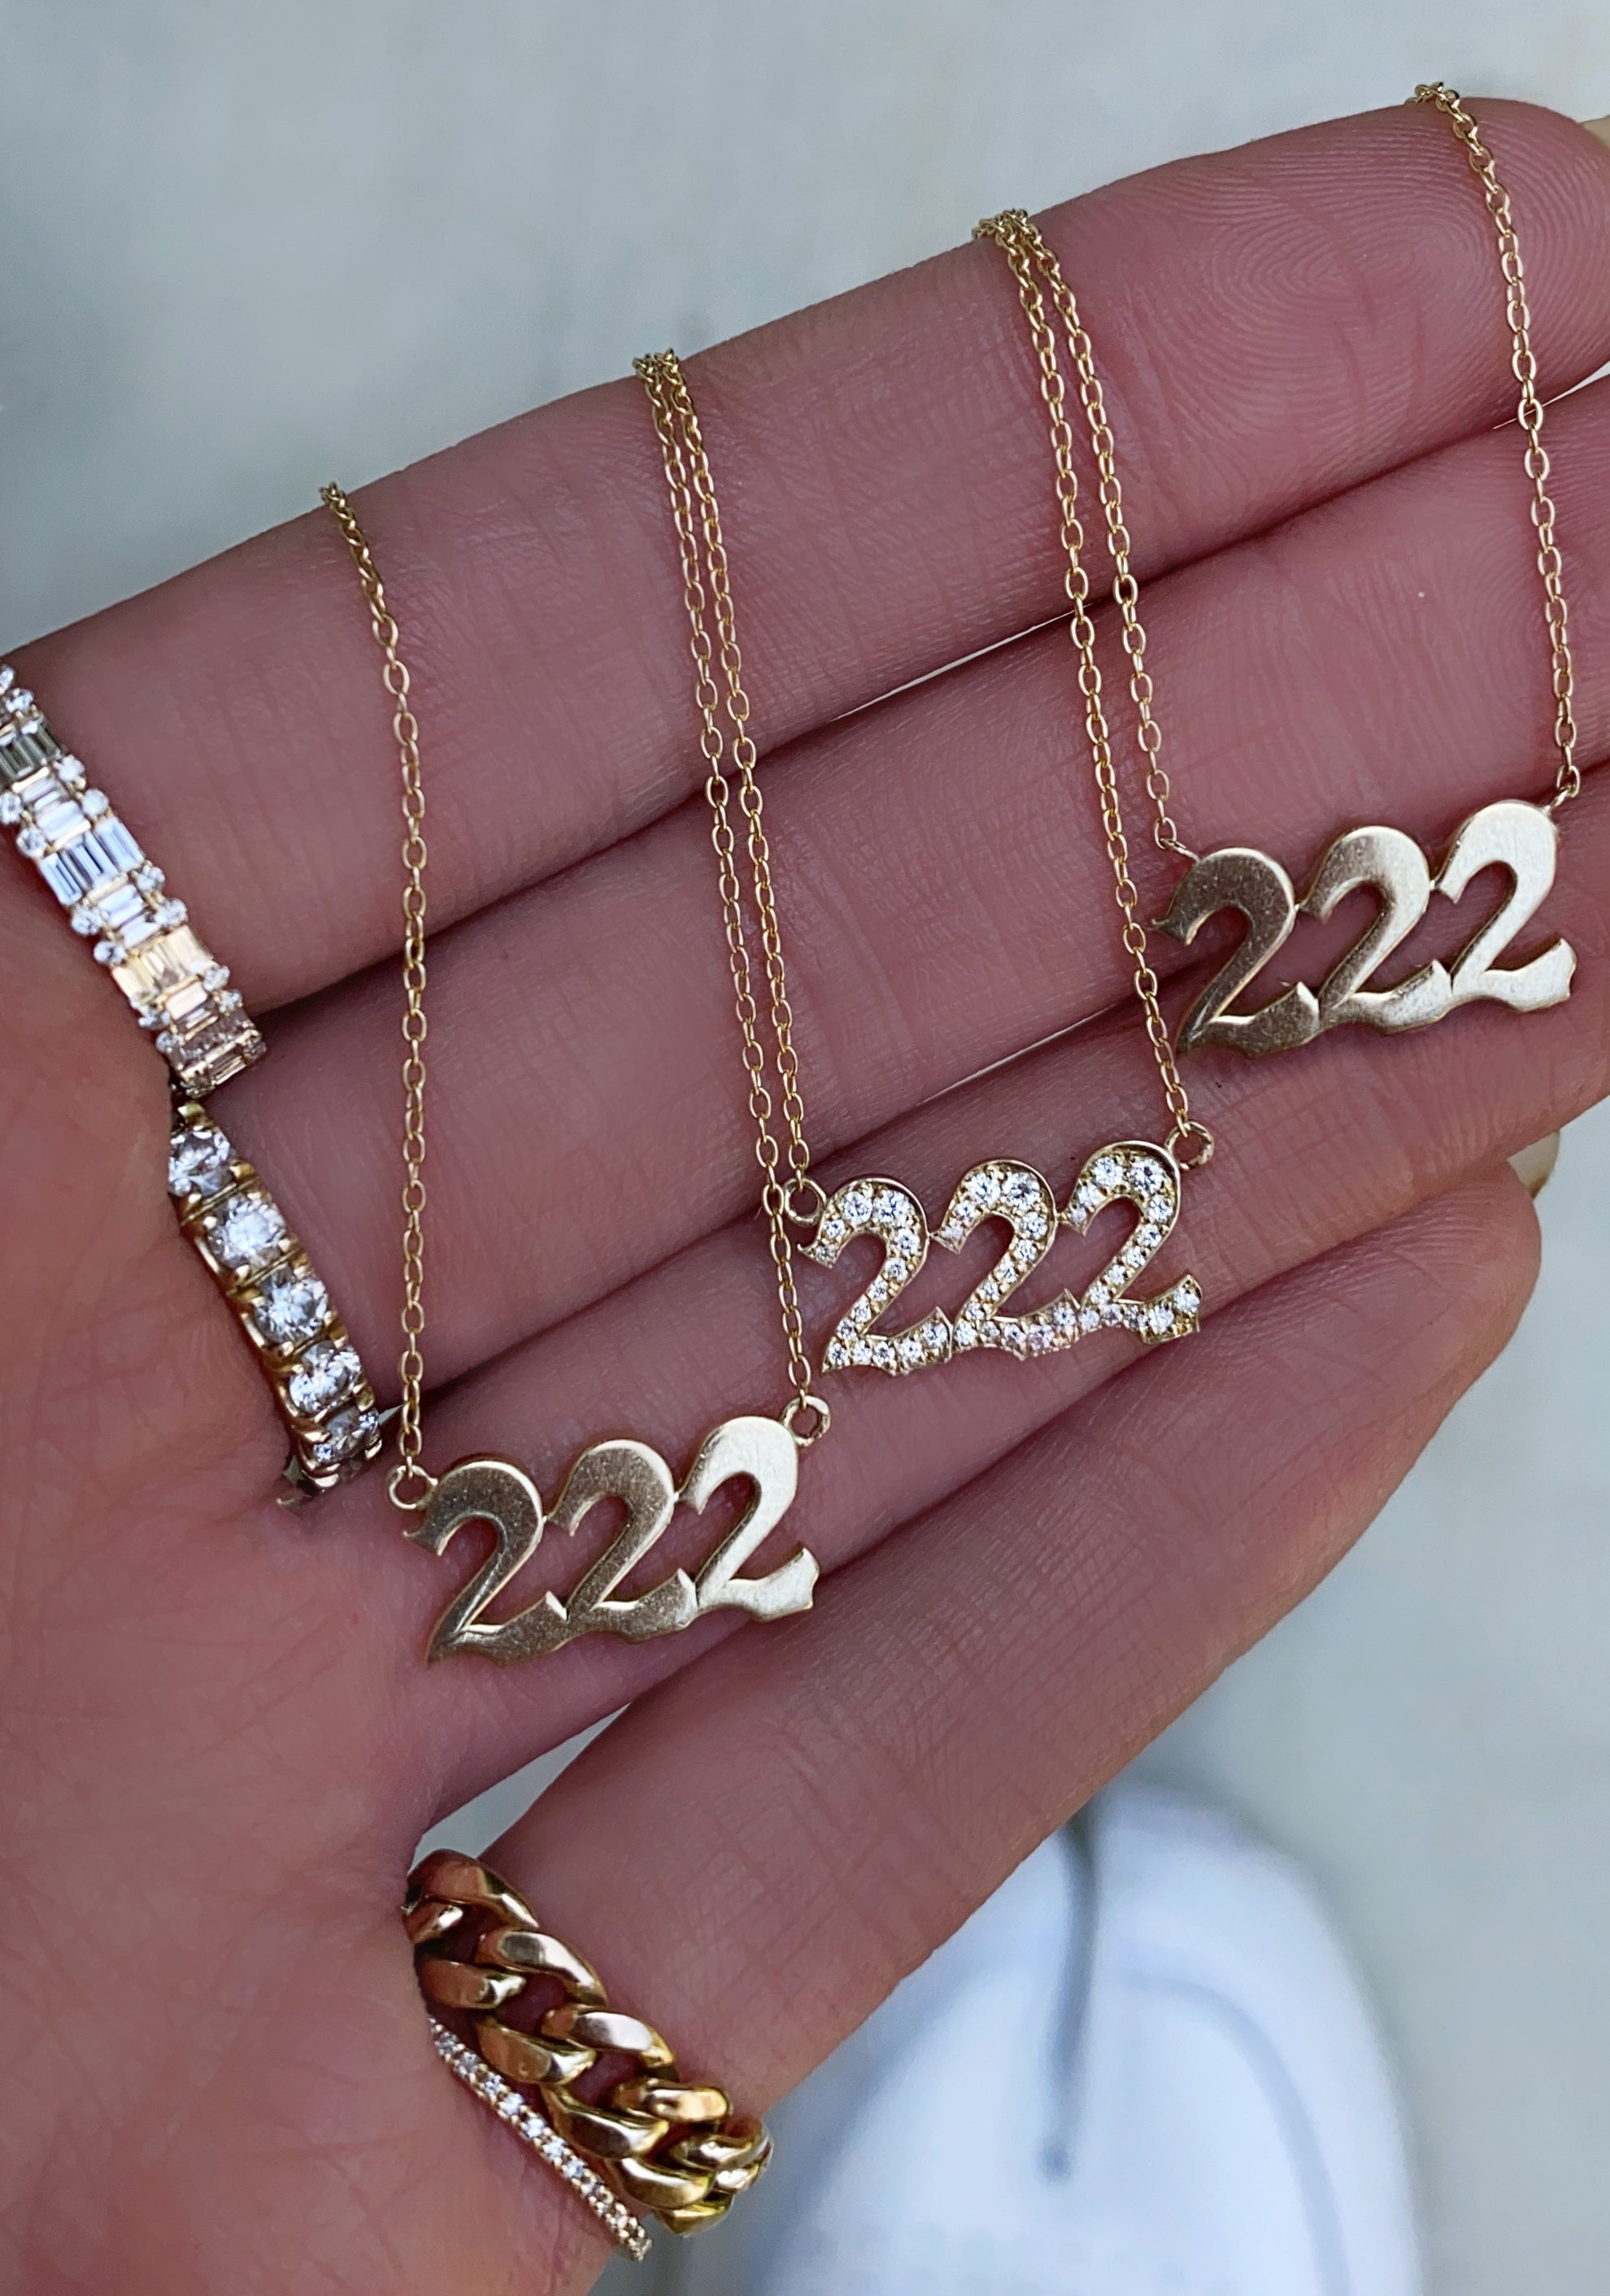 Discover more than 210 222 silver necklace